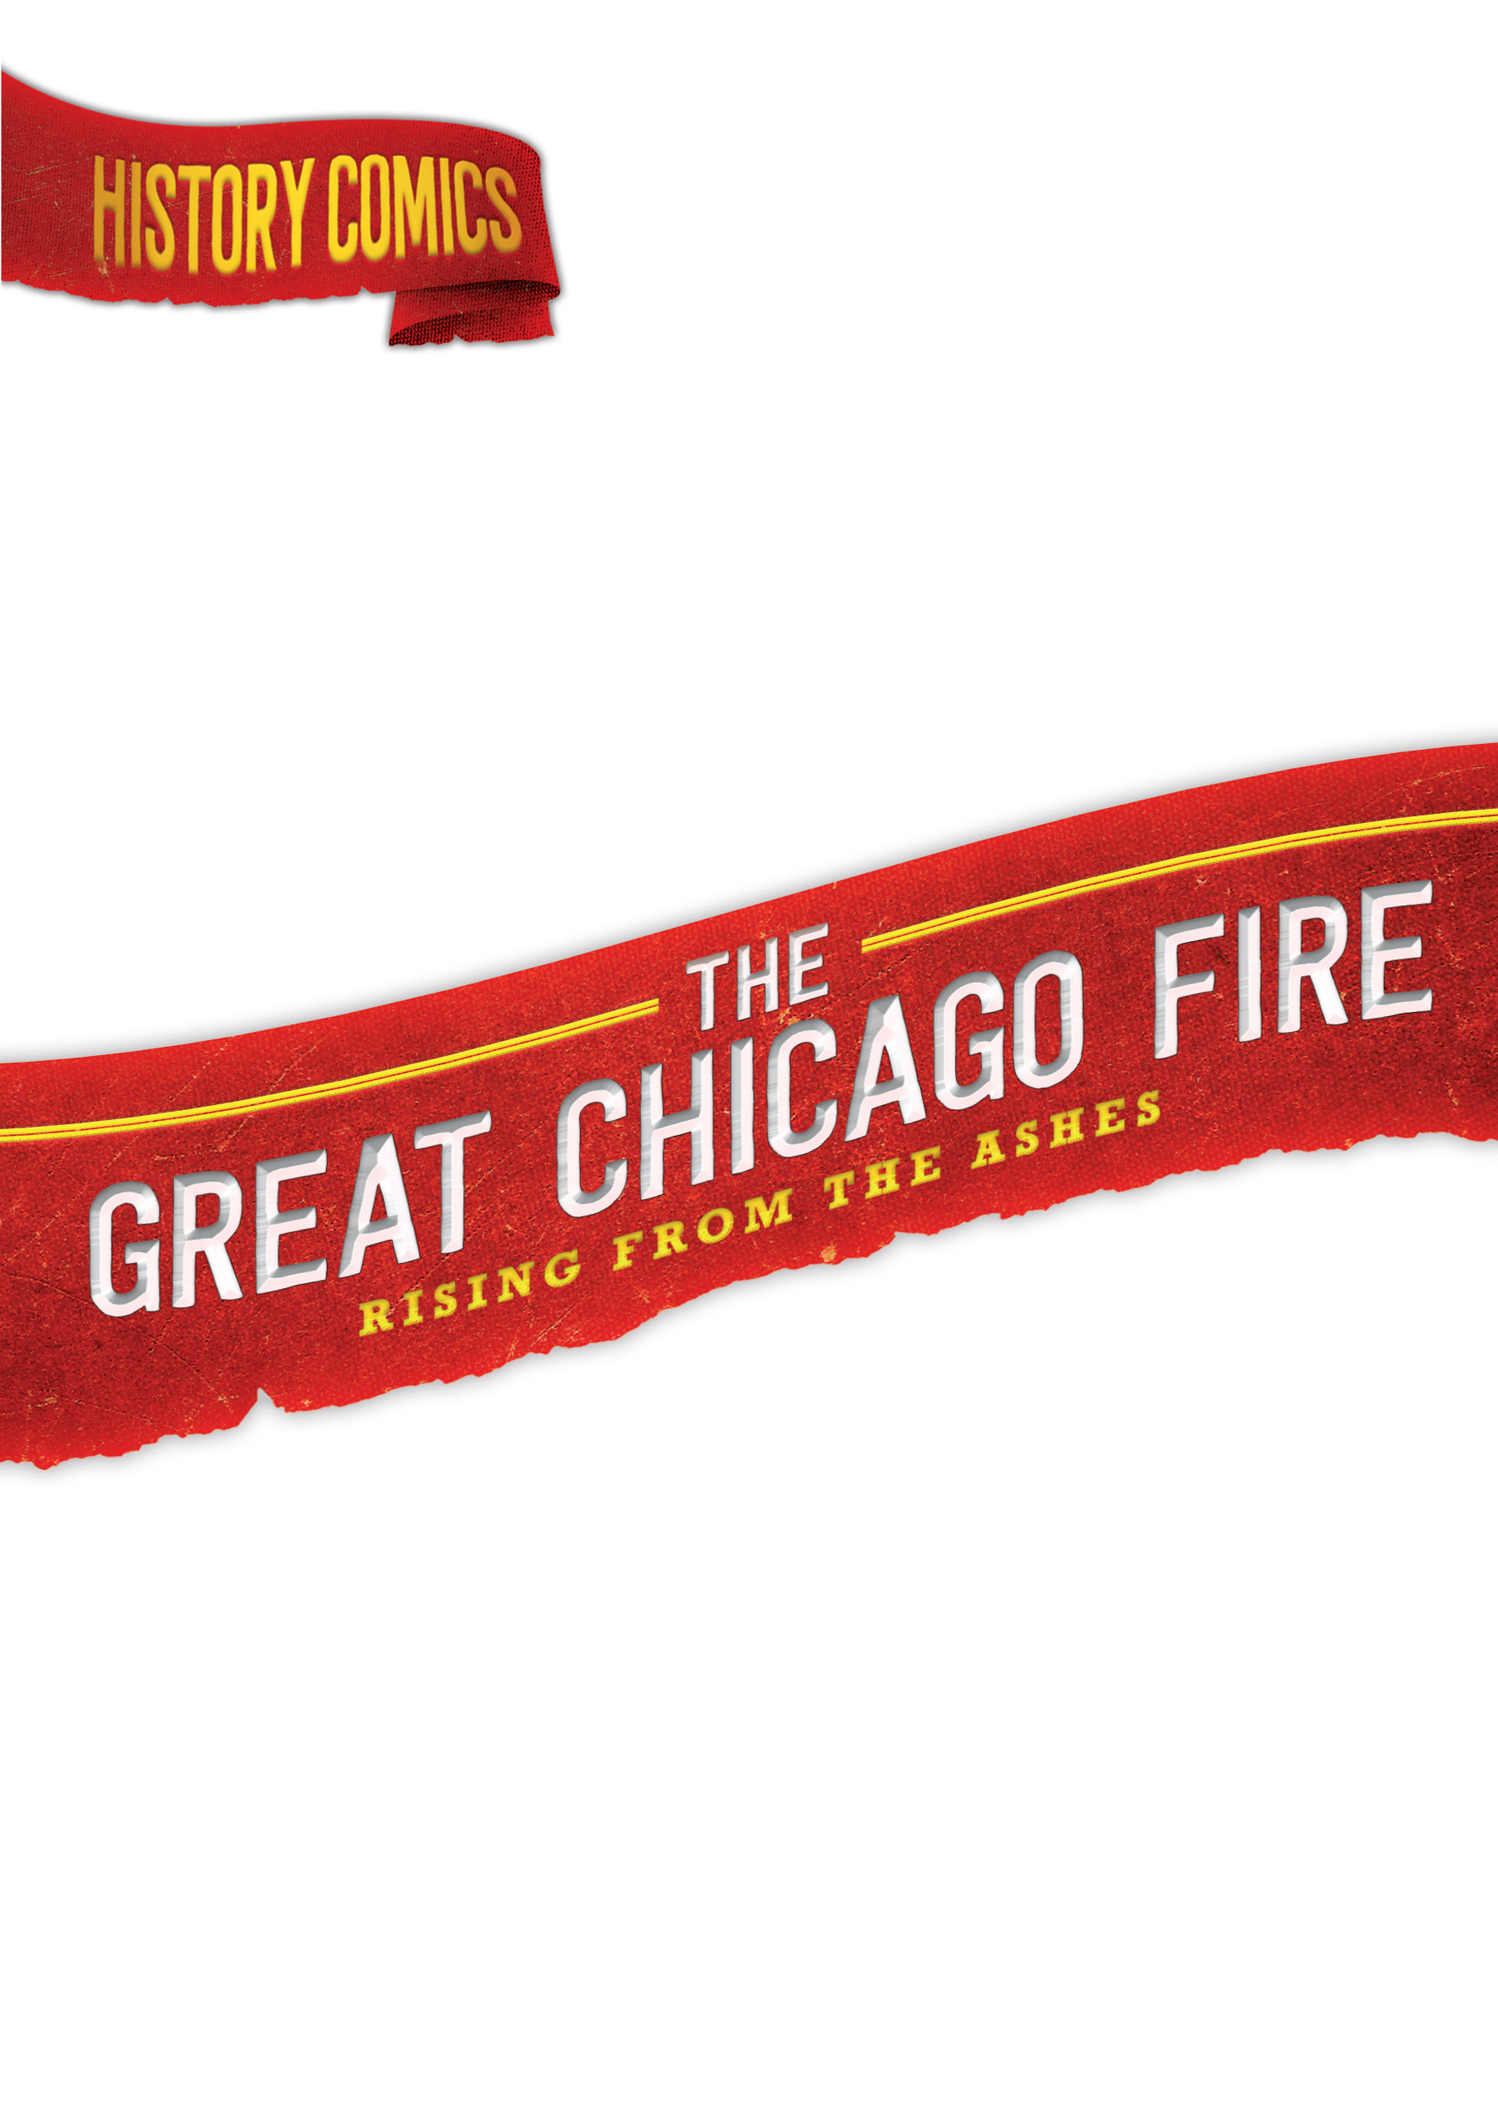 Read online History Comics comic -  Issue # The Great Chicago Fire: Rising From the Ashes - 2